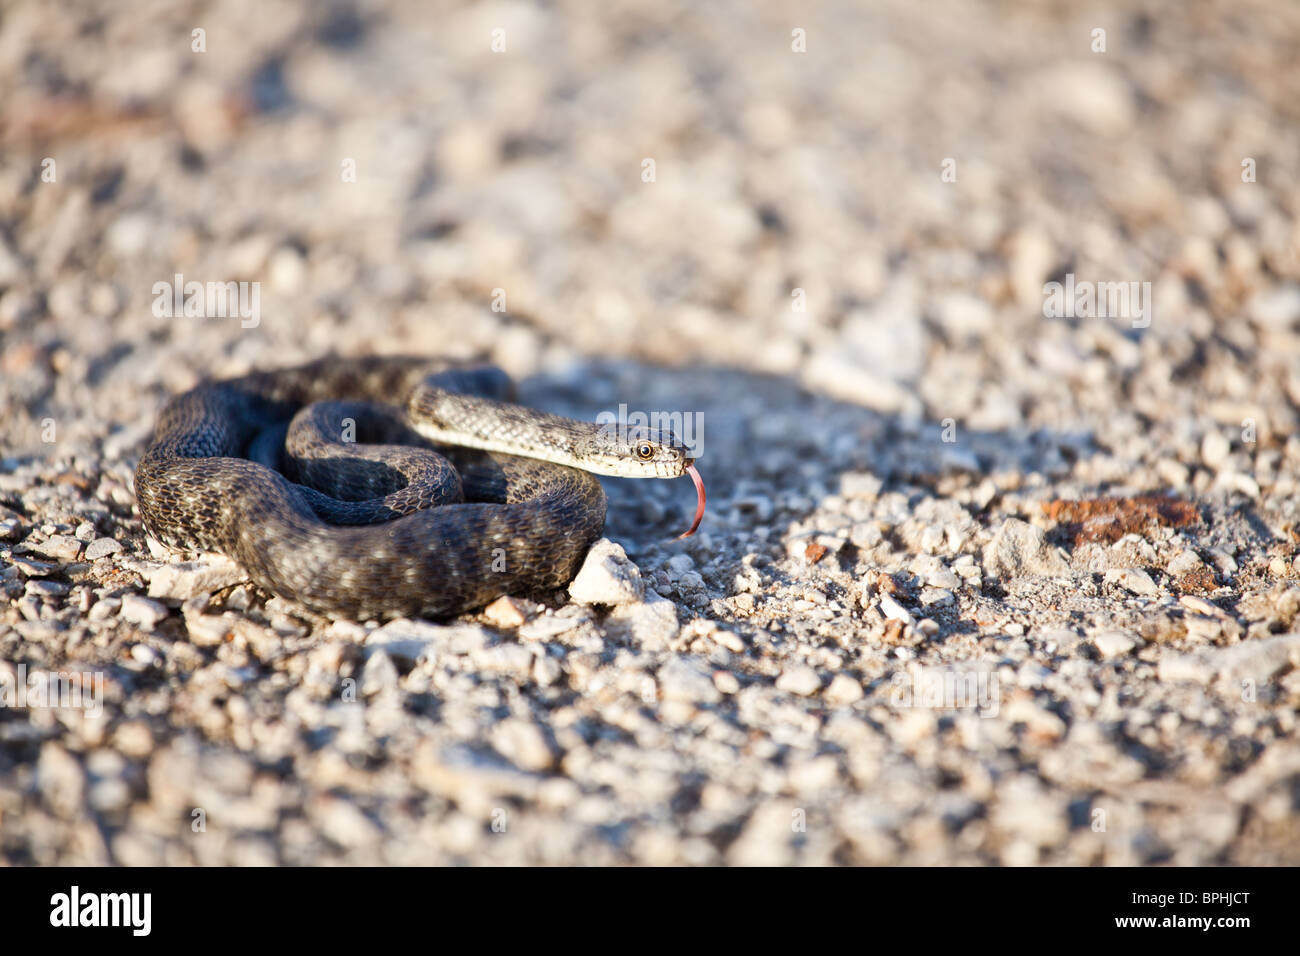 Dice snake in a defensive position. Stock Photo